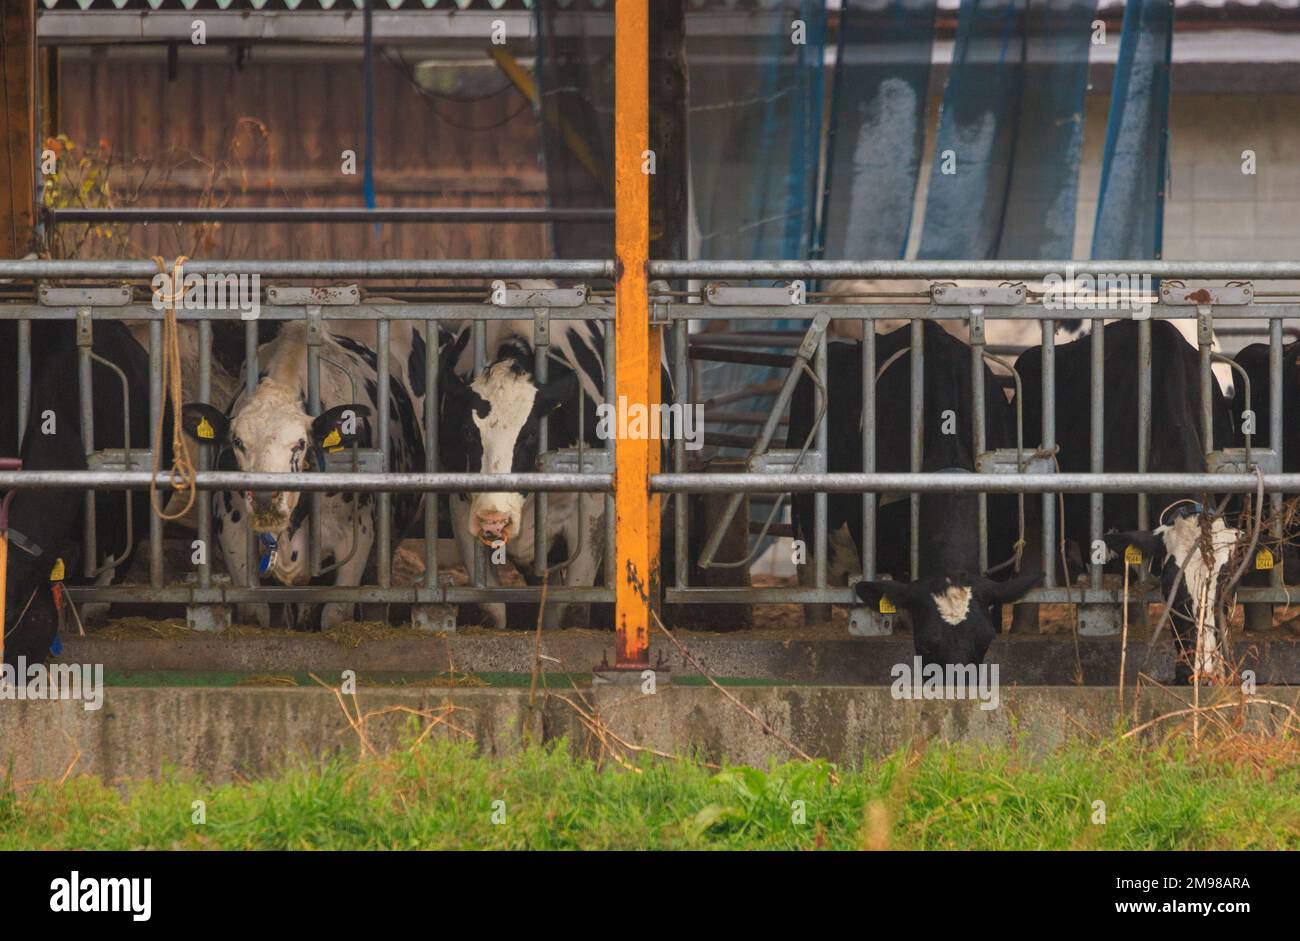 Cows Behind Bars Eating Feed from Trough at Industrial Cattle Farm Stock Photo